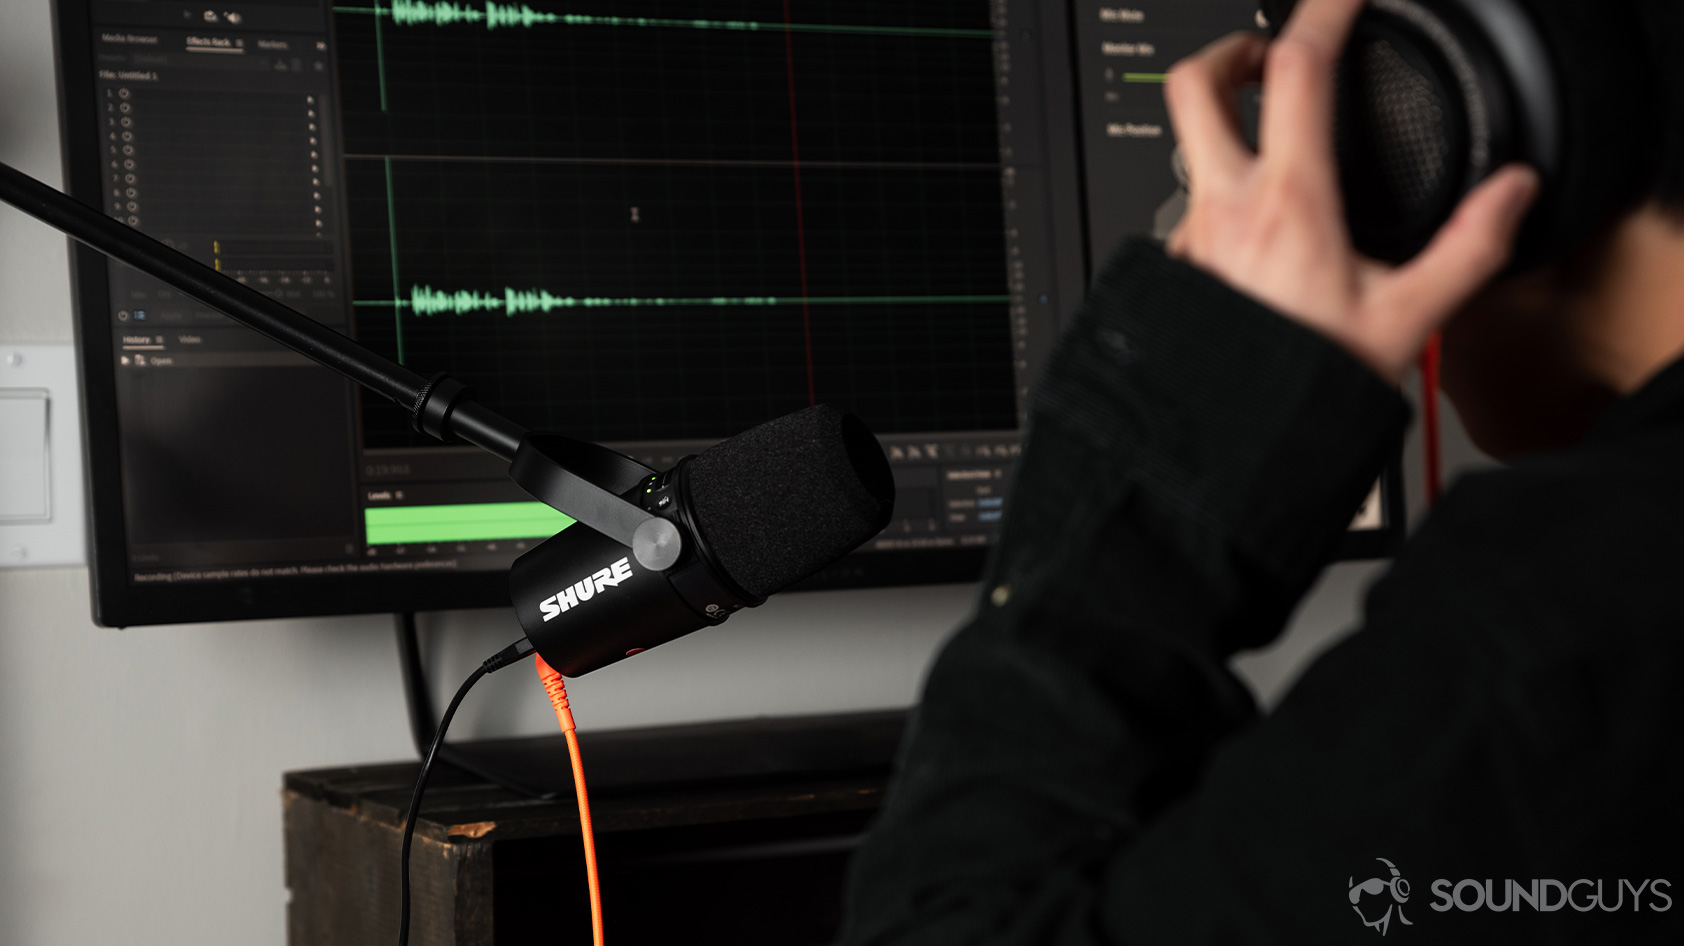 A woman uses the Shure MV7 USB microphone and adjusts headphones as she monitors the recording.